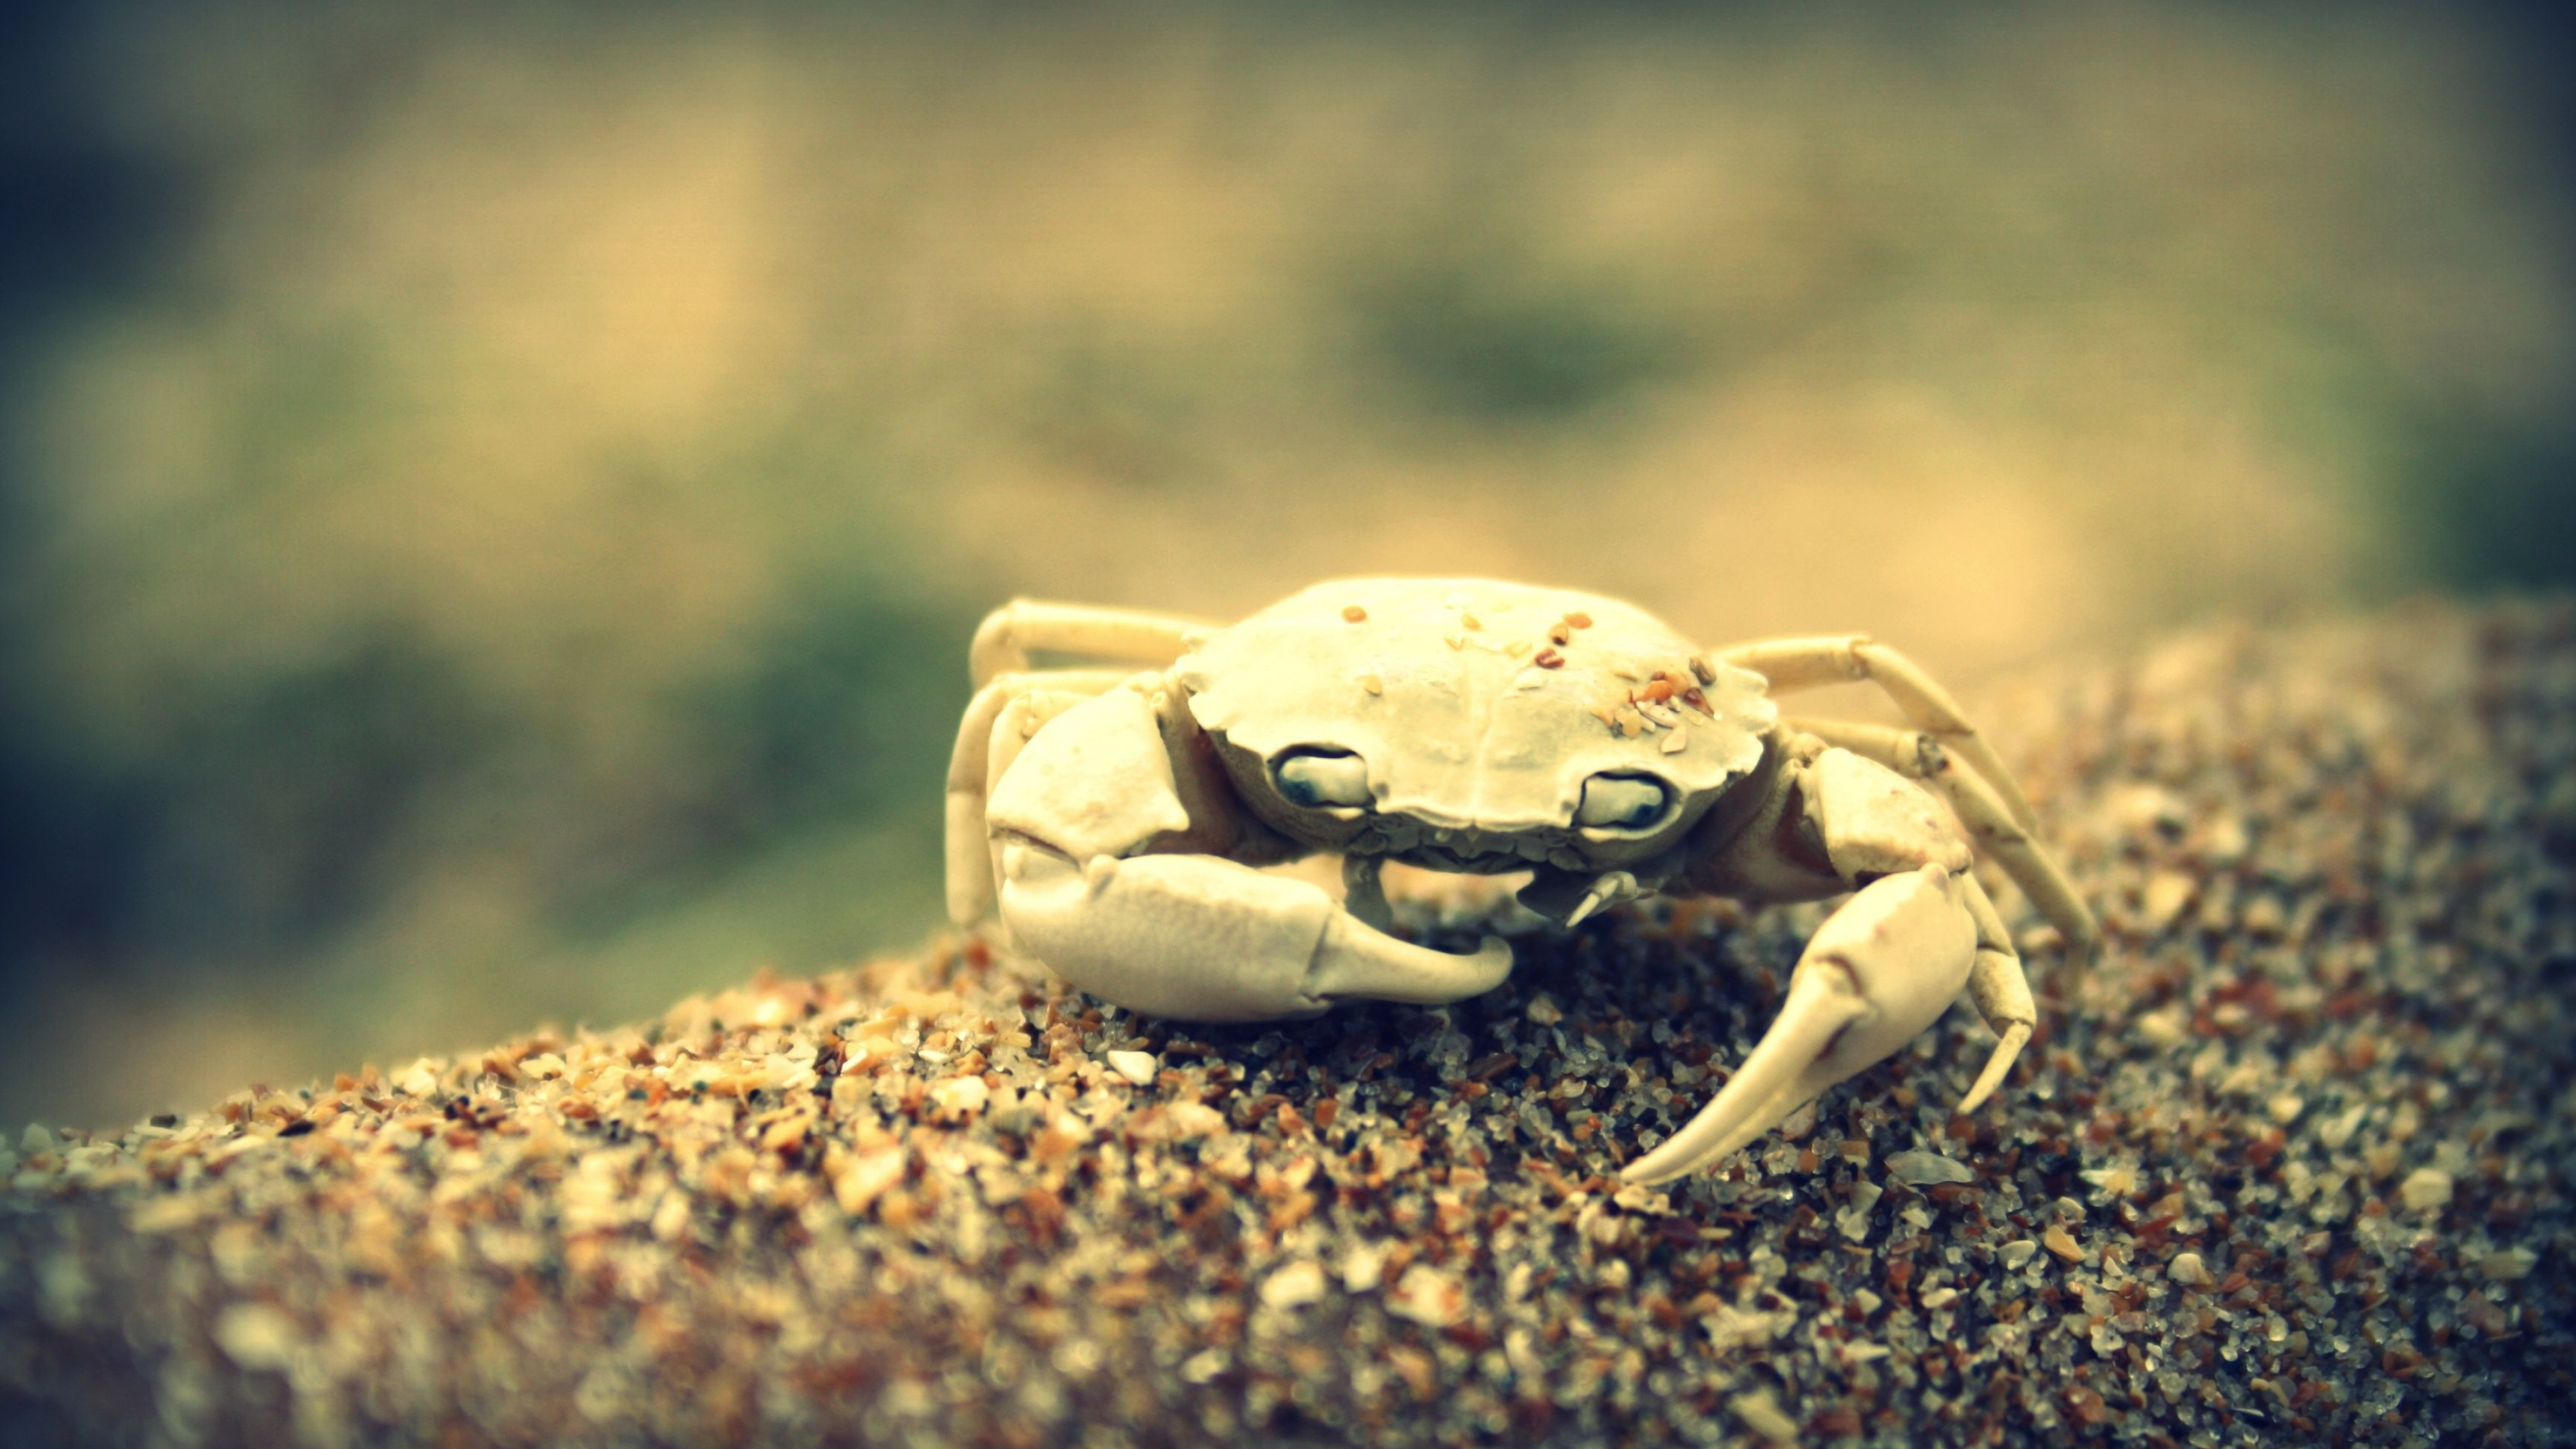 Crab: Animals with eight walking legs and two grasping claws. 3840x2160 4K Background.